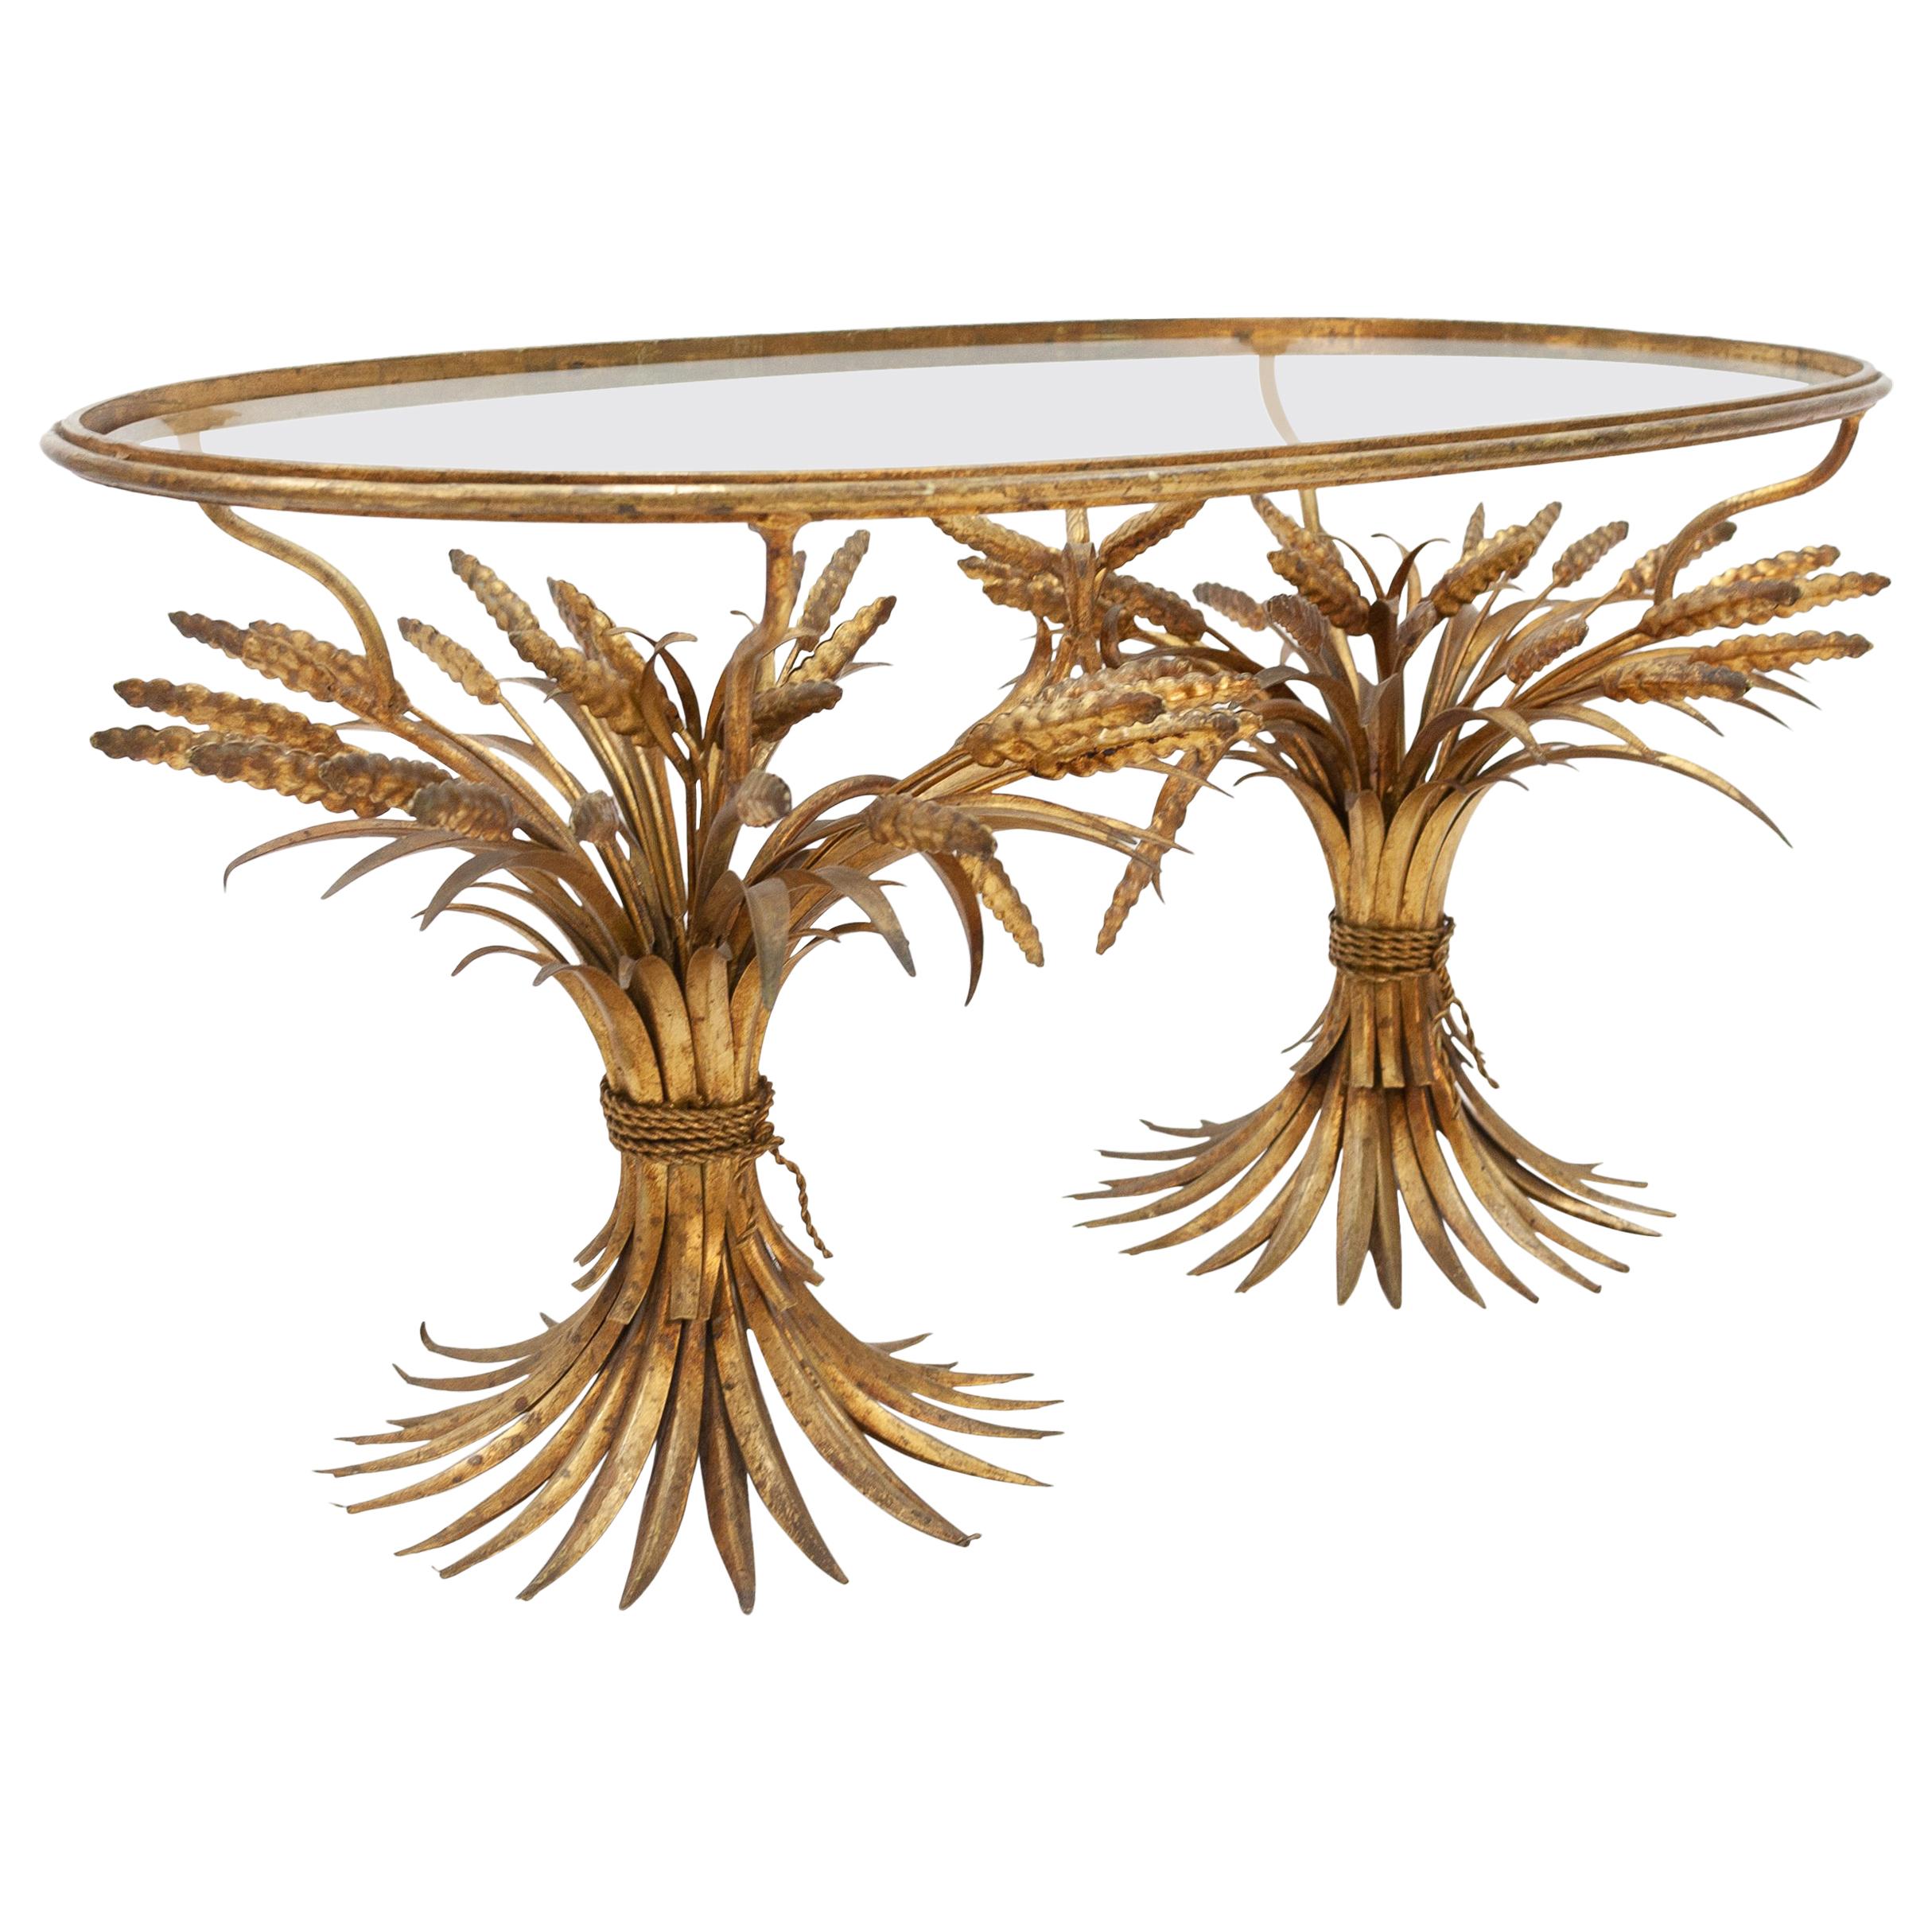 Wheat Sheaf Coco Chanel Table at 1stDibs